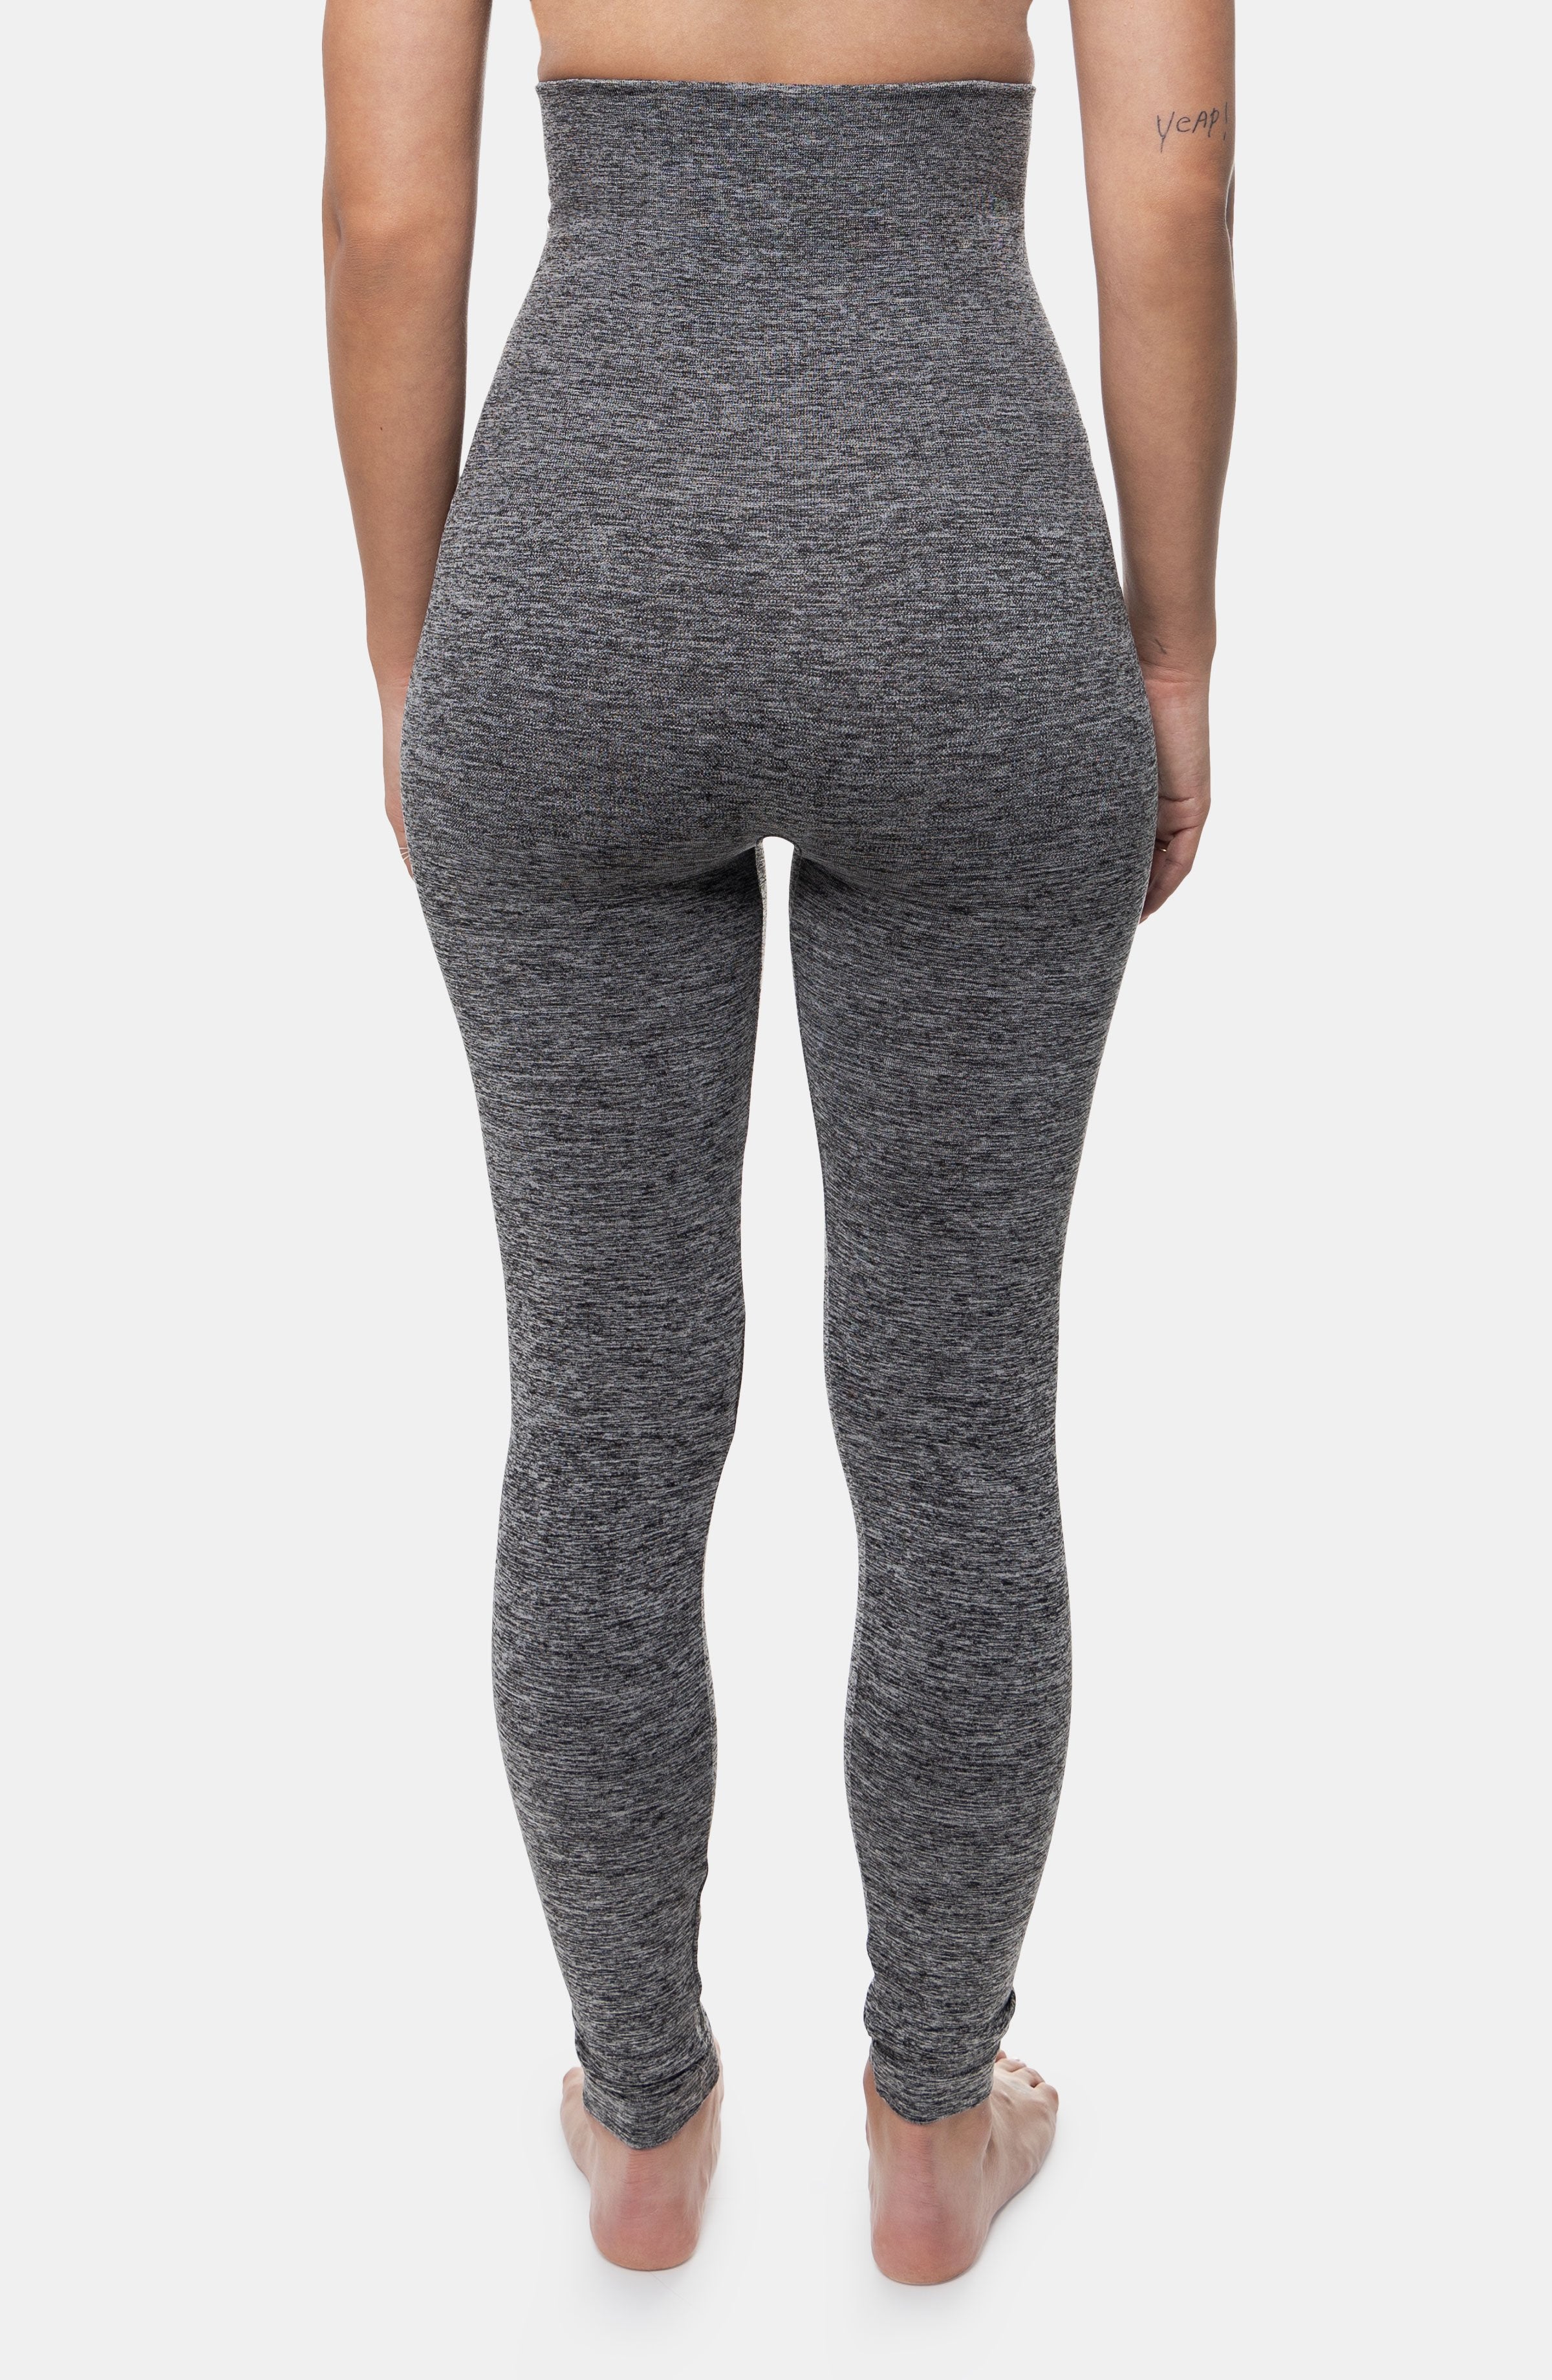 Belly Bandit Mother Tucker Leggings - Black, Extra Small - English Edition